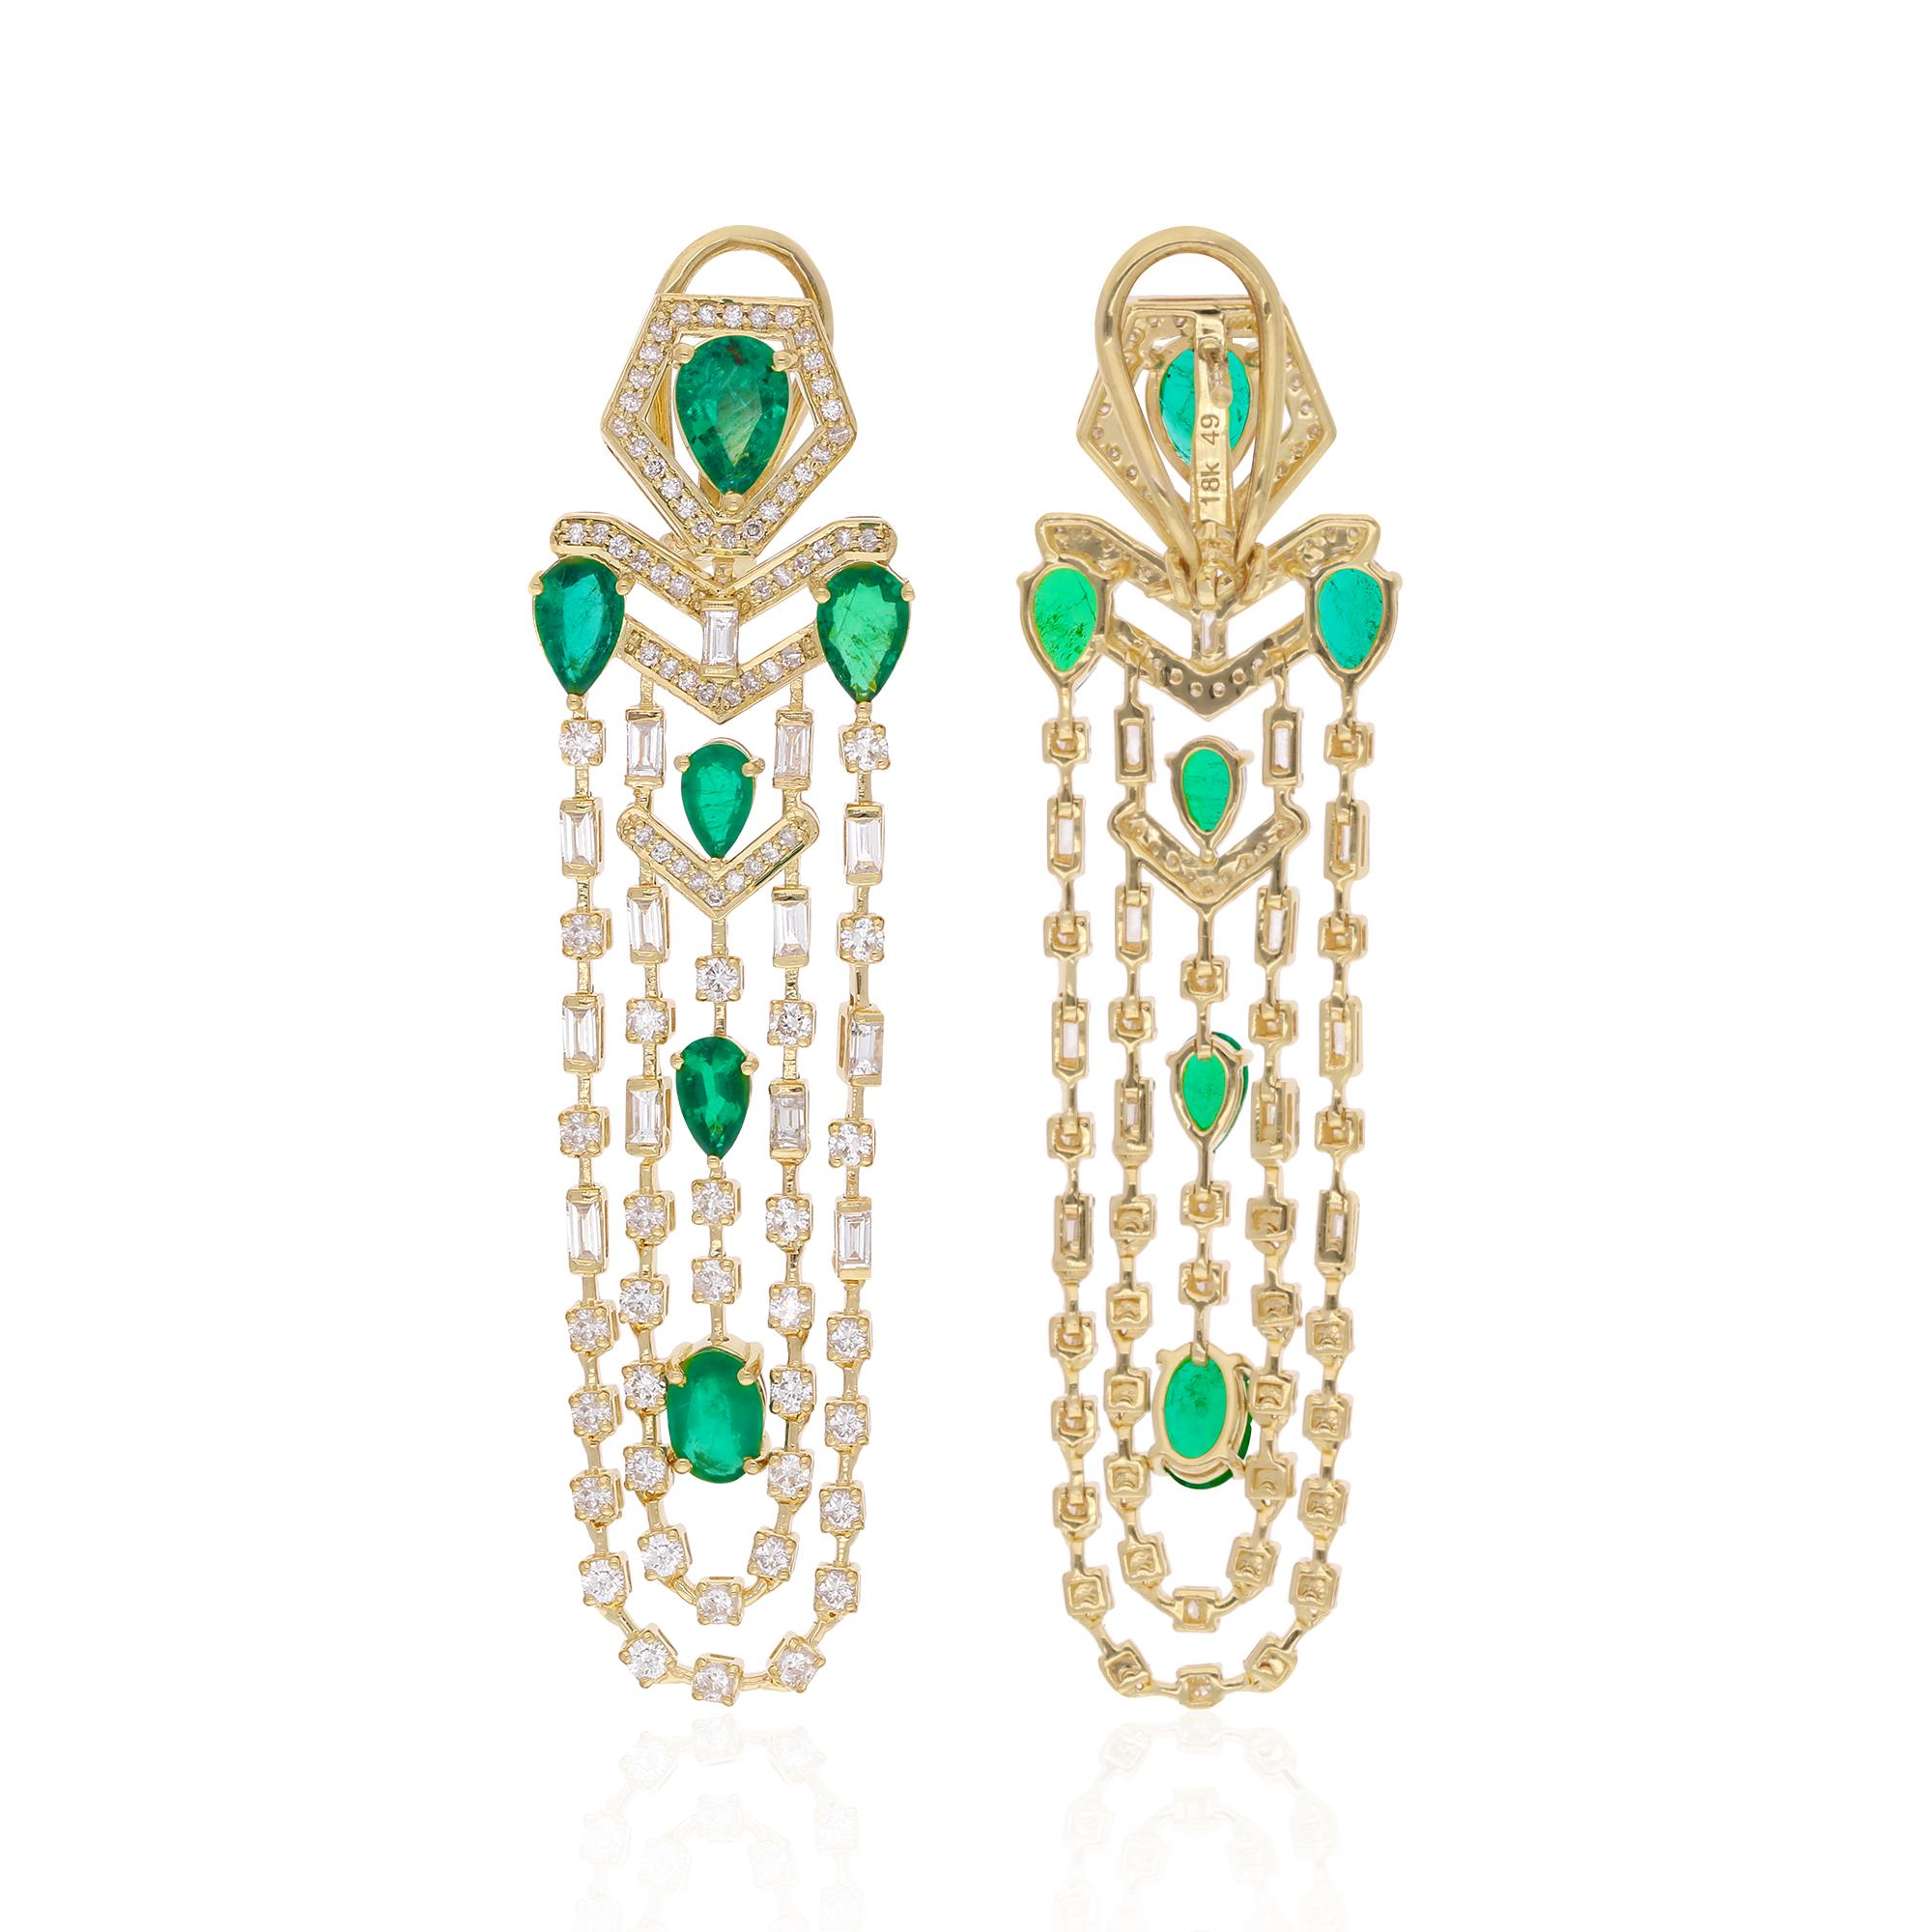 Item Code :- SEE-13232
Gross Wt. :- 17.32 gm
18k Yellow Gold Wt. :- 16.18 gm
Natural Diamond Wt. :- 2.80 Ct. ( AVERAGE DIAMOND CLARITY SI1-SI2 & COLOR H-I )
Emerald Wt. :- 4.01 Ct.
Earrings Size :- 55 mm approx.

✦ Sizing
.....................
We